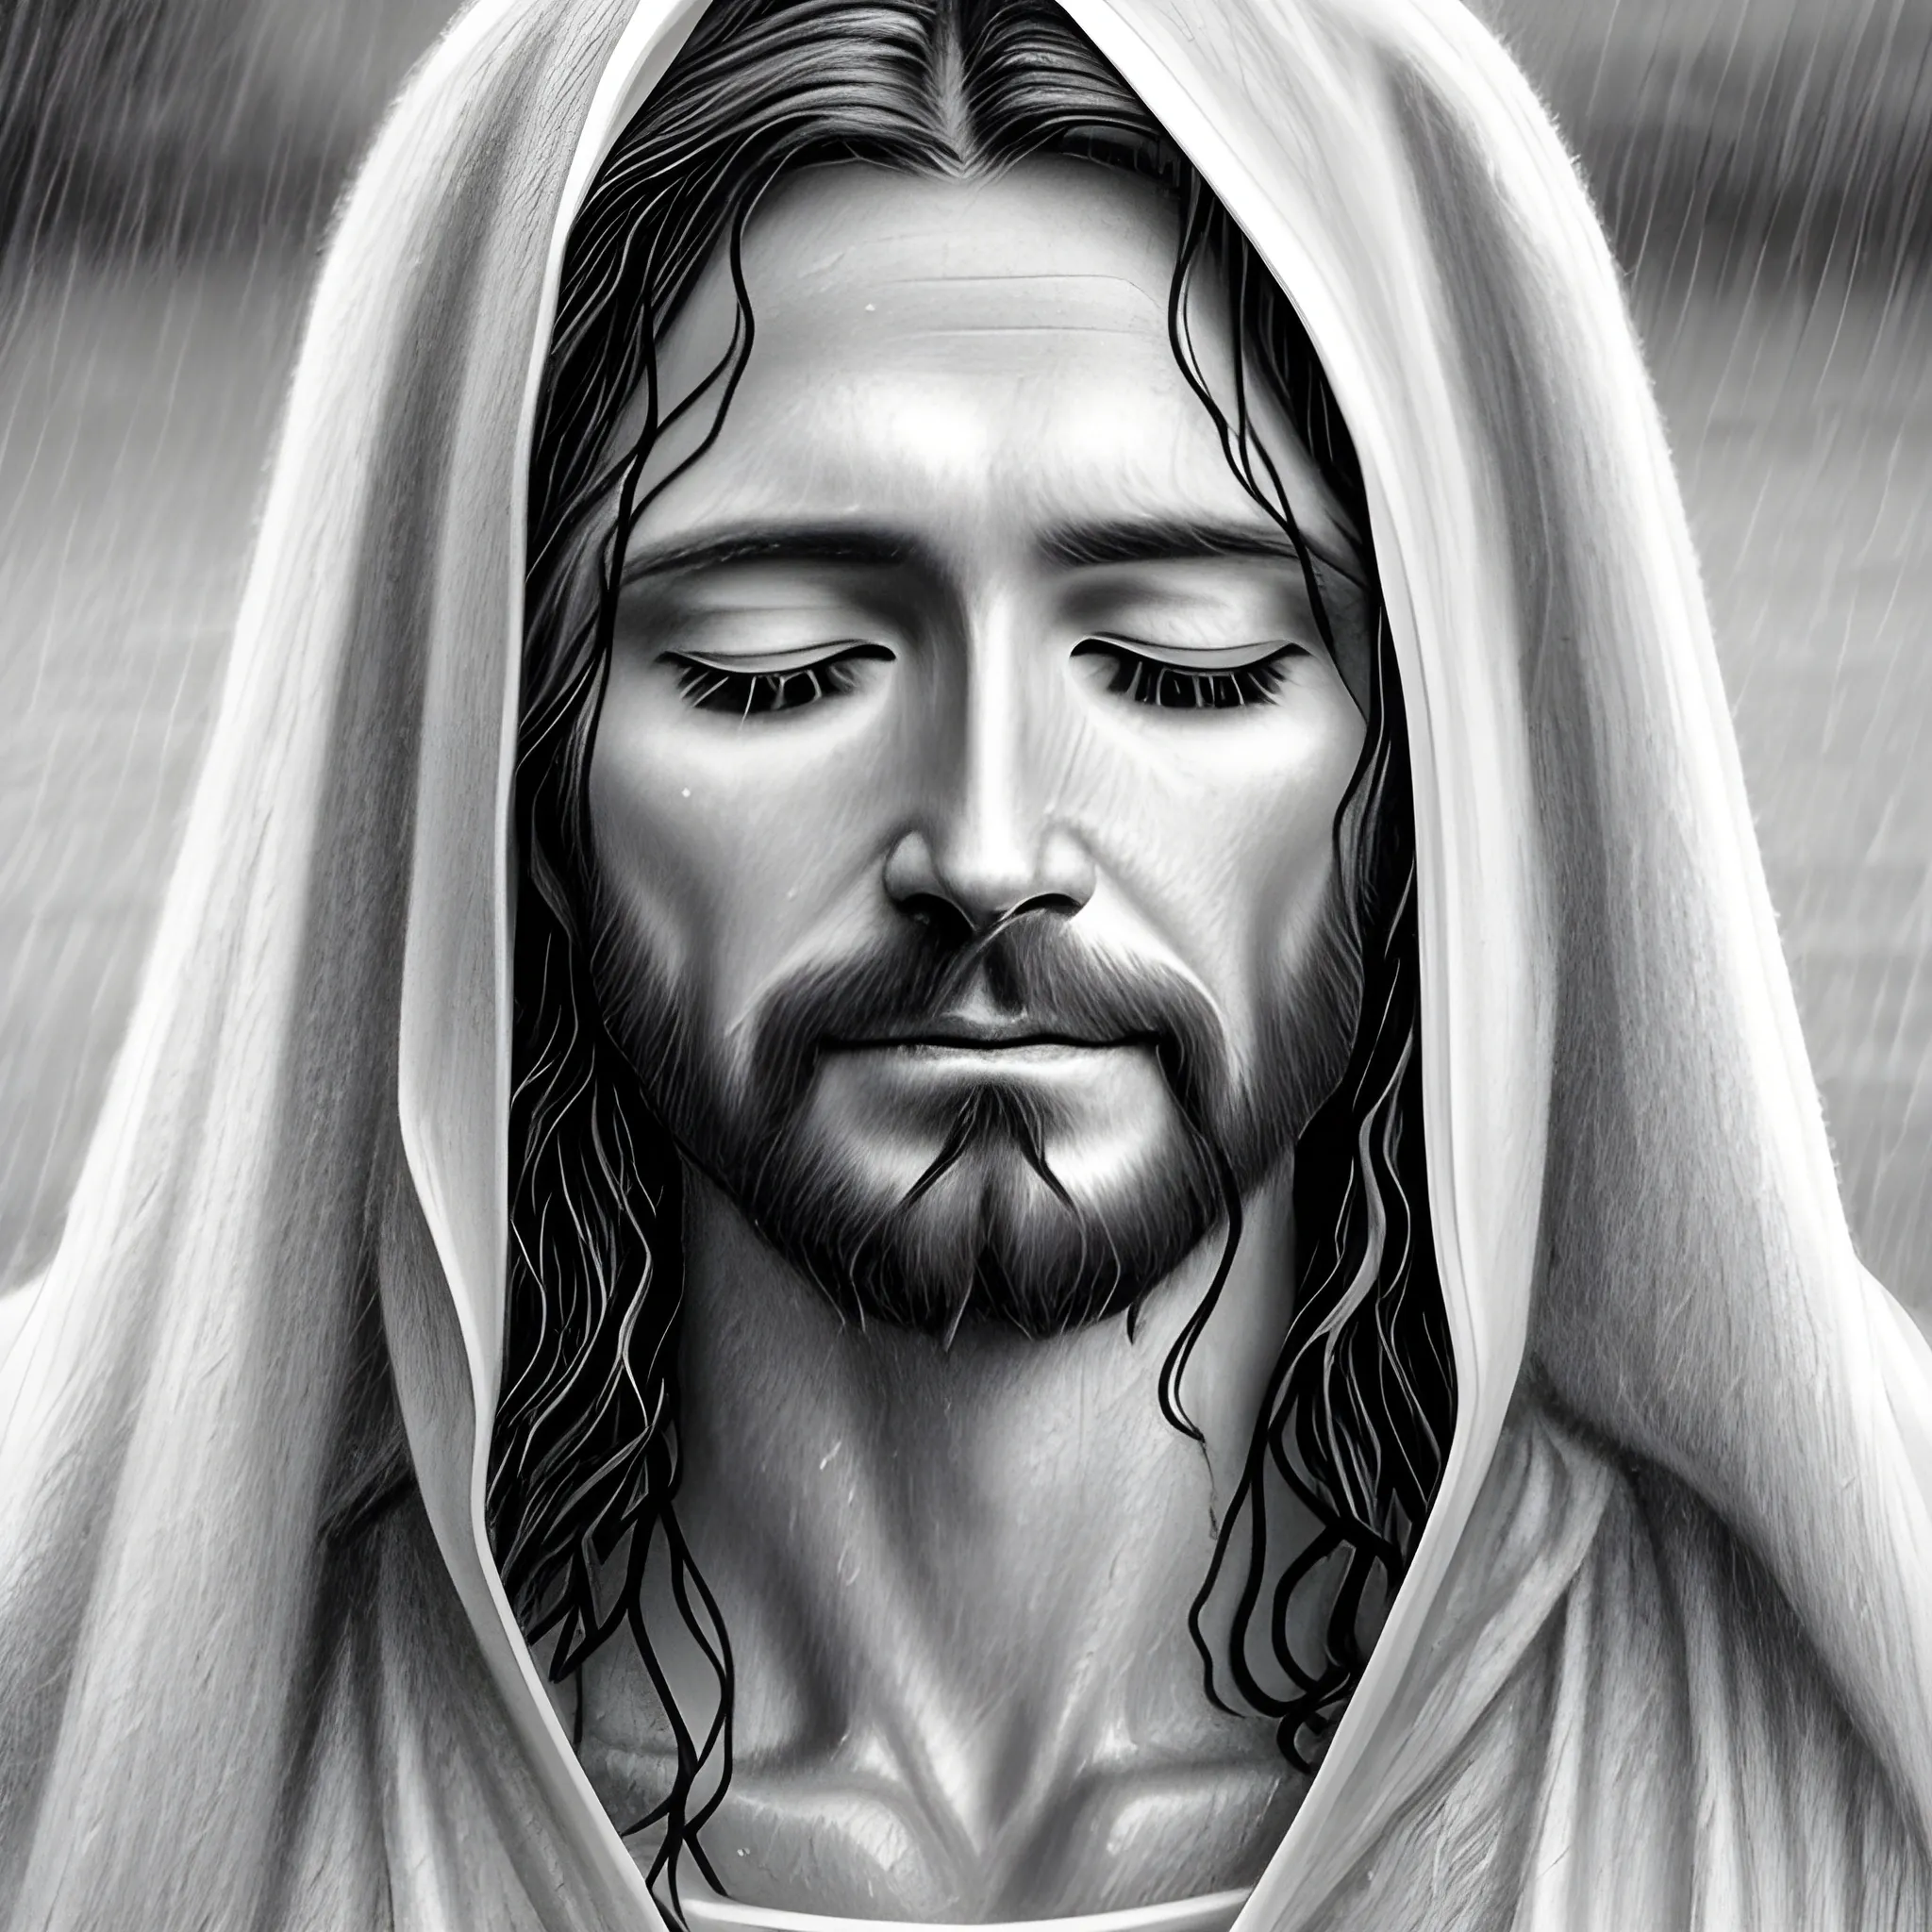 serene jesus christ in the rain, realistic, 4k, bright light face, close eyes, praying hands together, Pencil Sketch